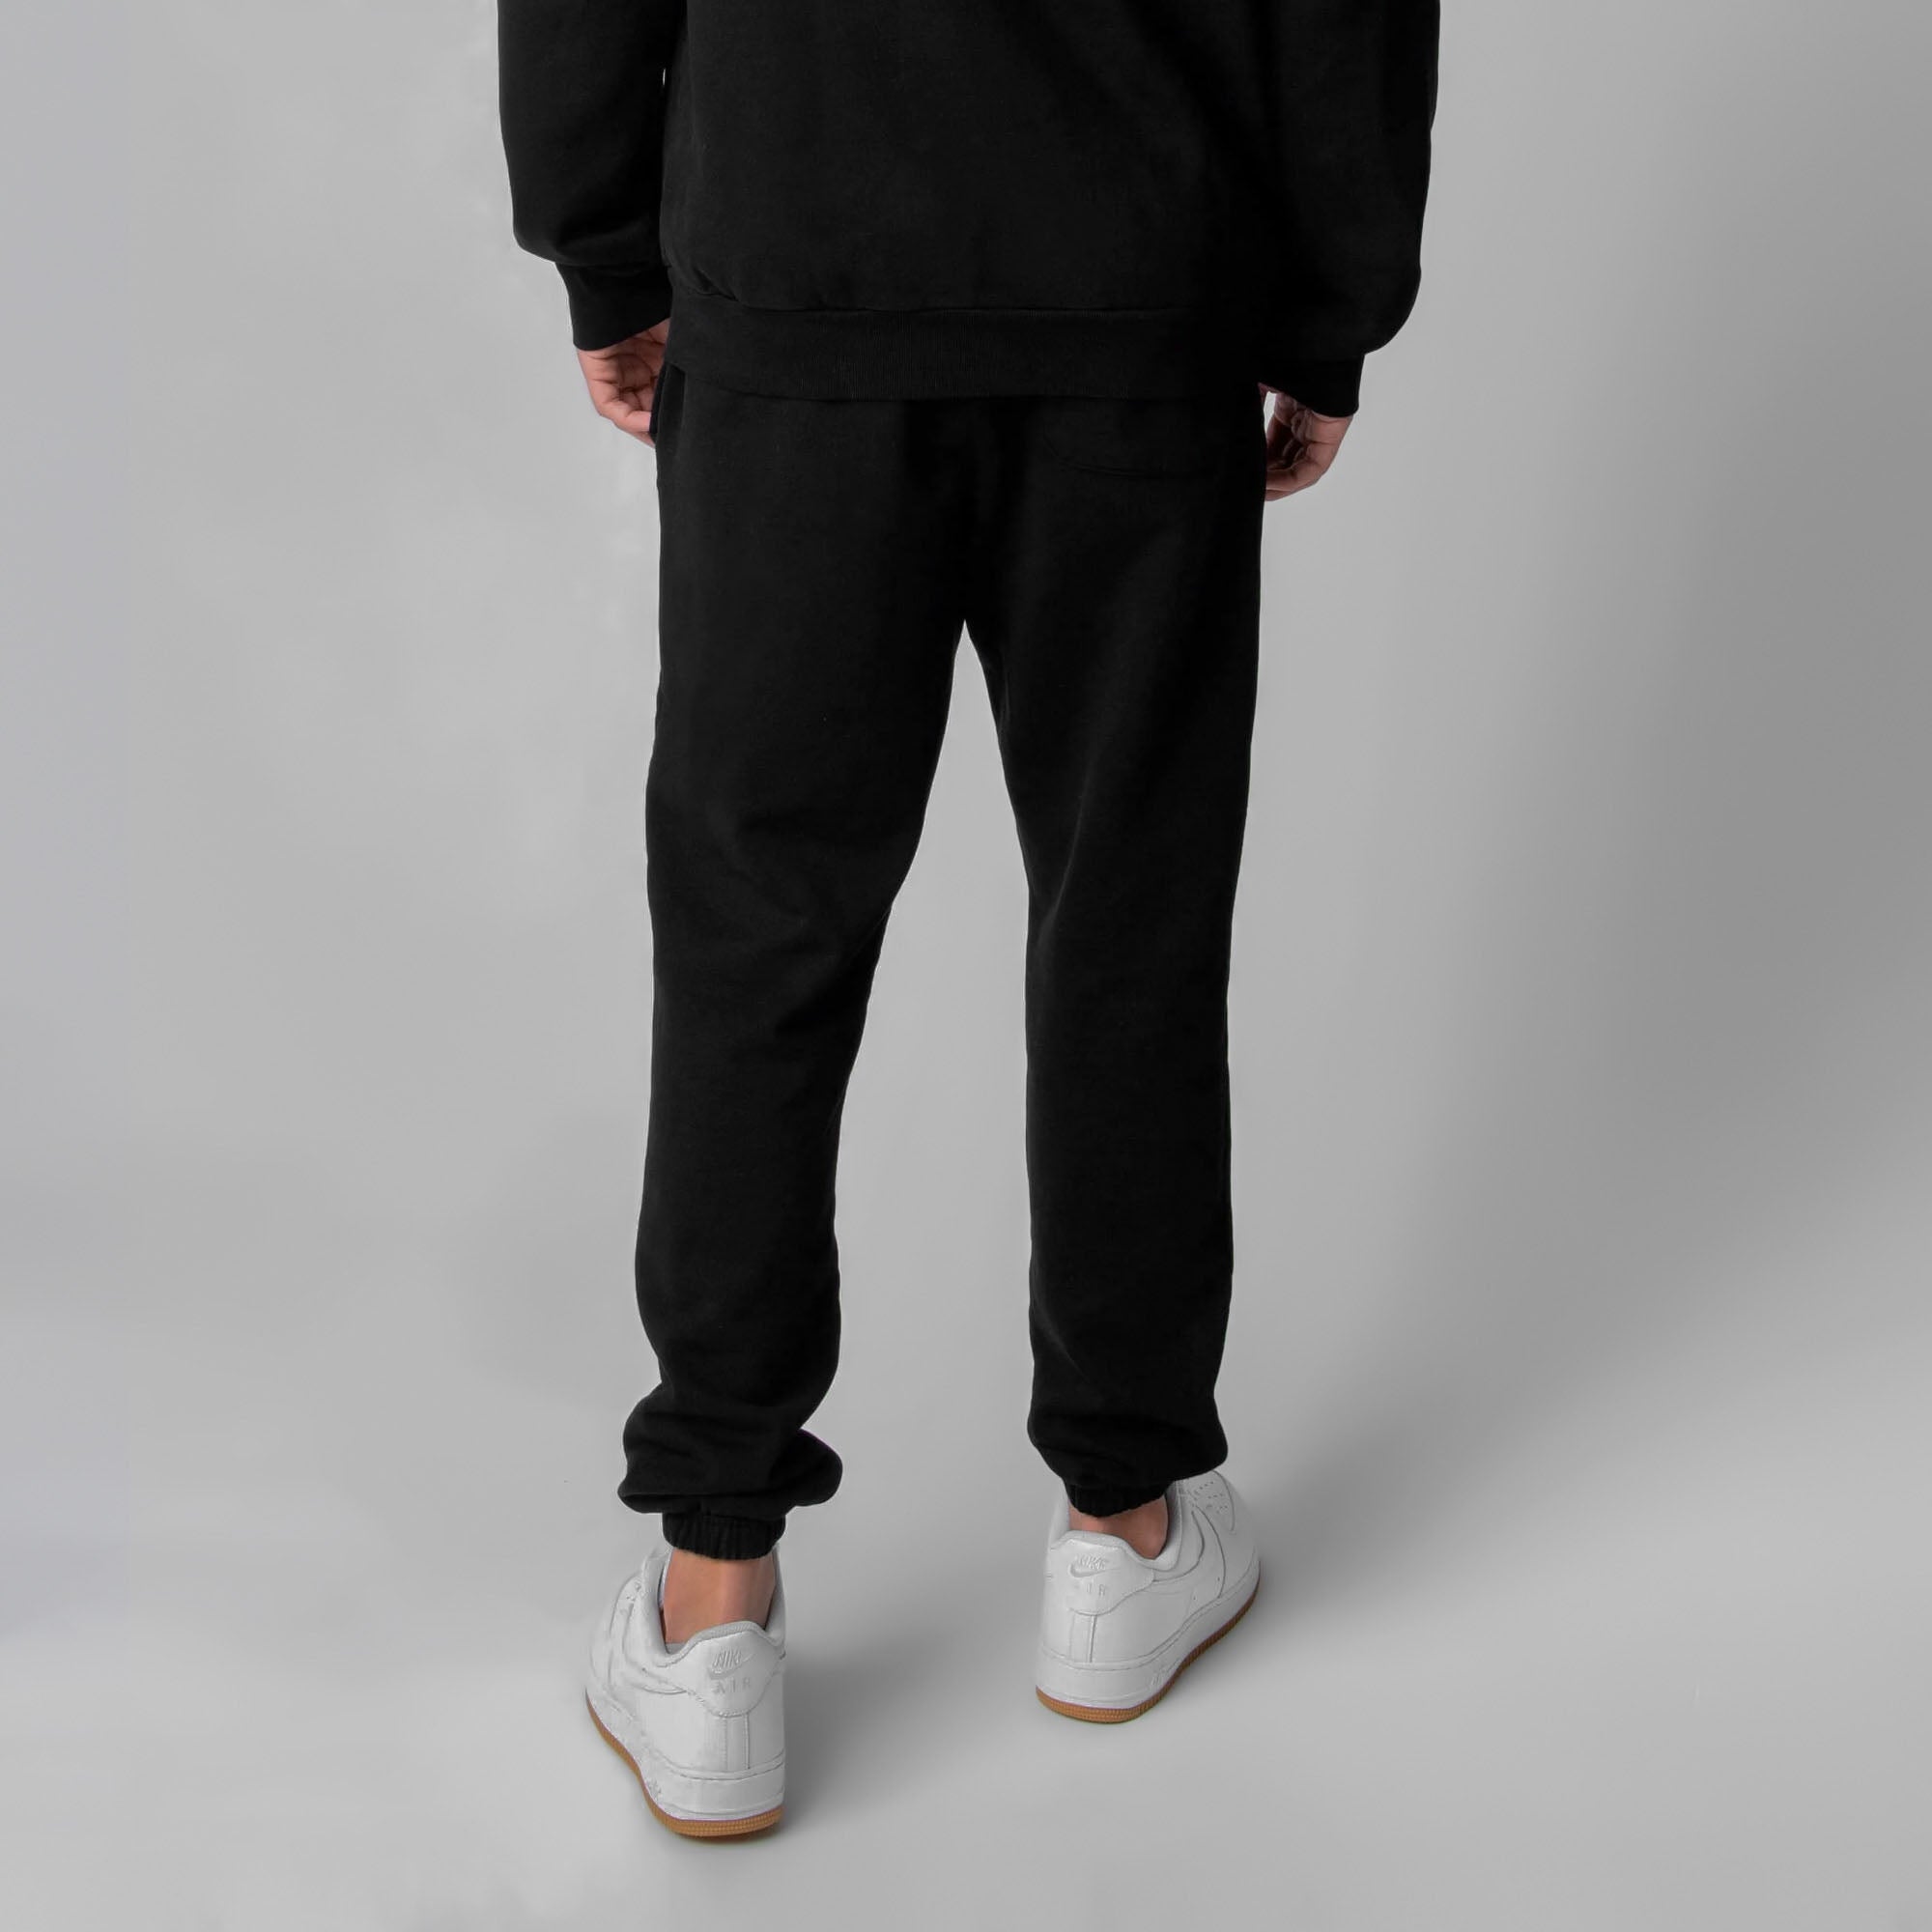 DOUBLET, Embroidered Cable Sweatpants, Men